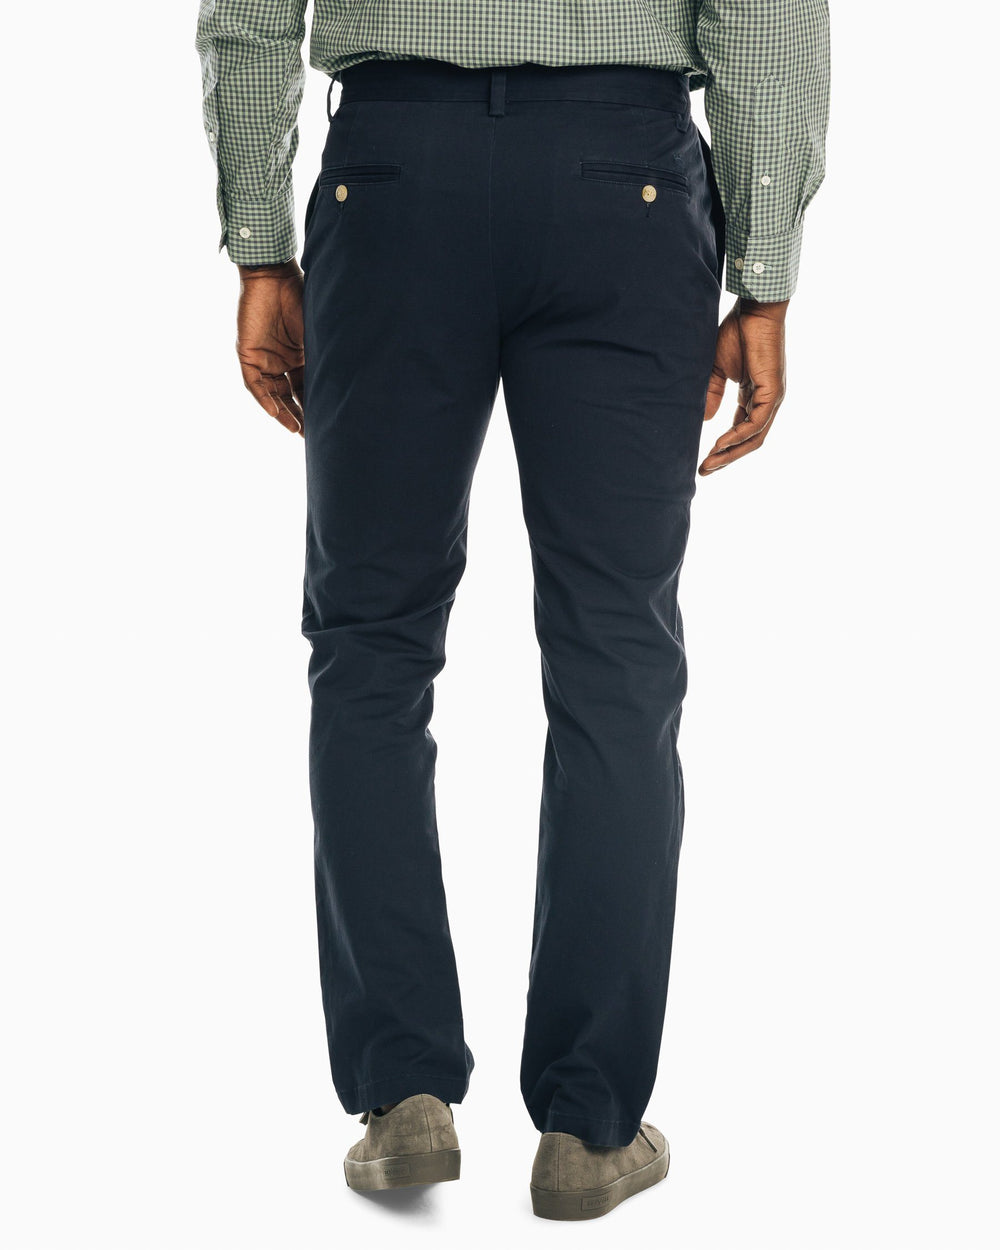 The back view of the Men's Navy The New Channel Marker Chino Pant by Southern Tide - True Navy